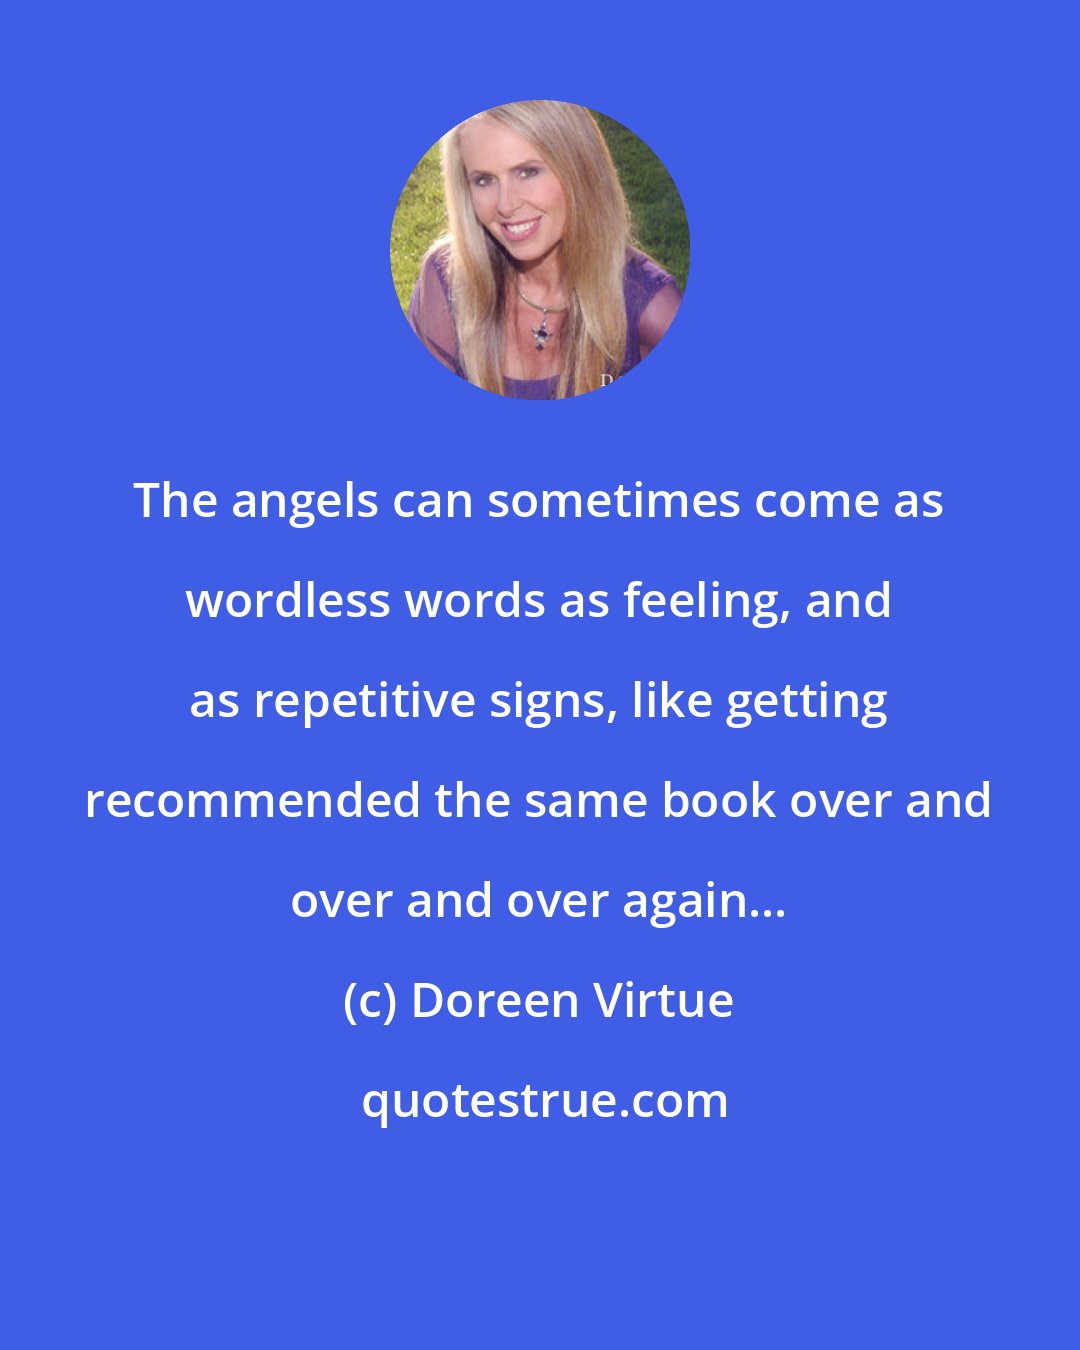 Doreen Virtue: The angels can sometimes come as wordless words as feeling, and as repetitive signs, like getting recommended the same book over and over and over again...